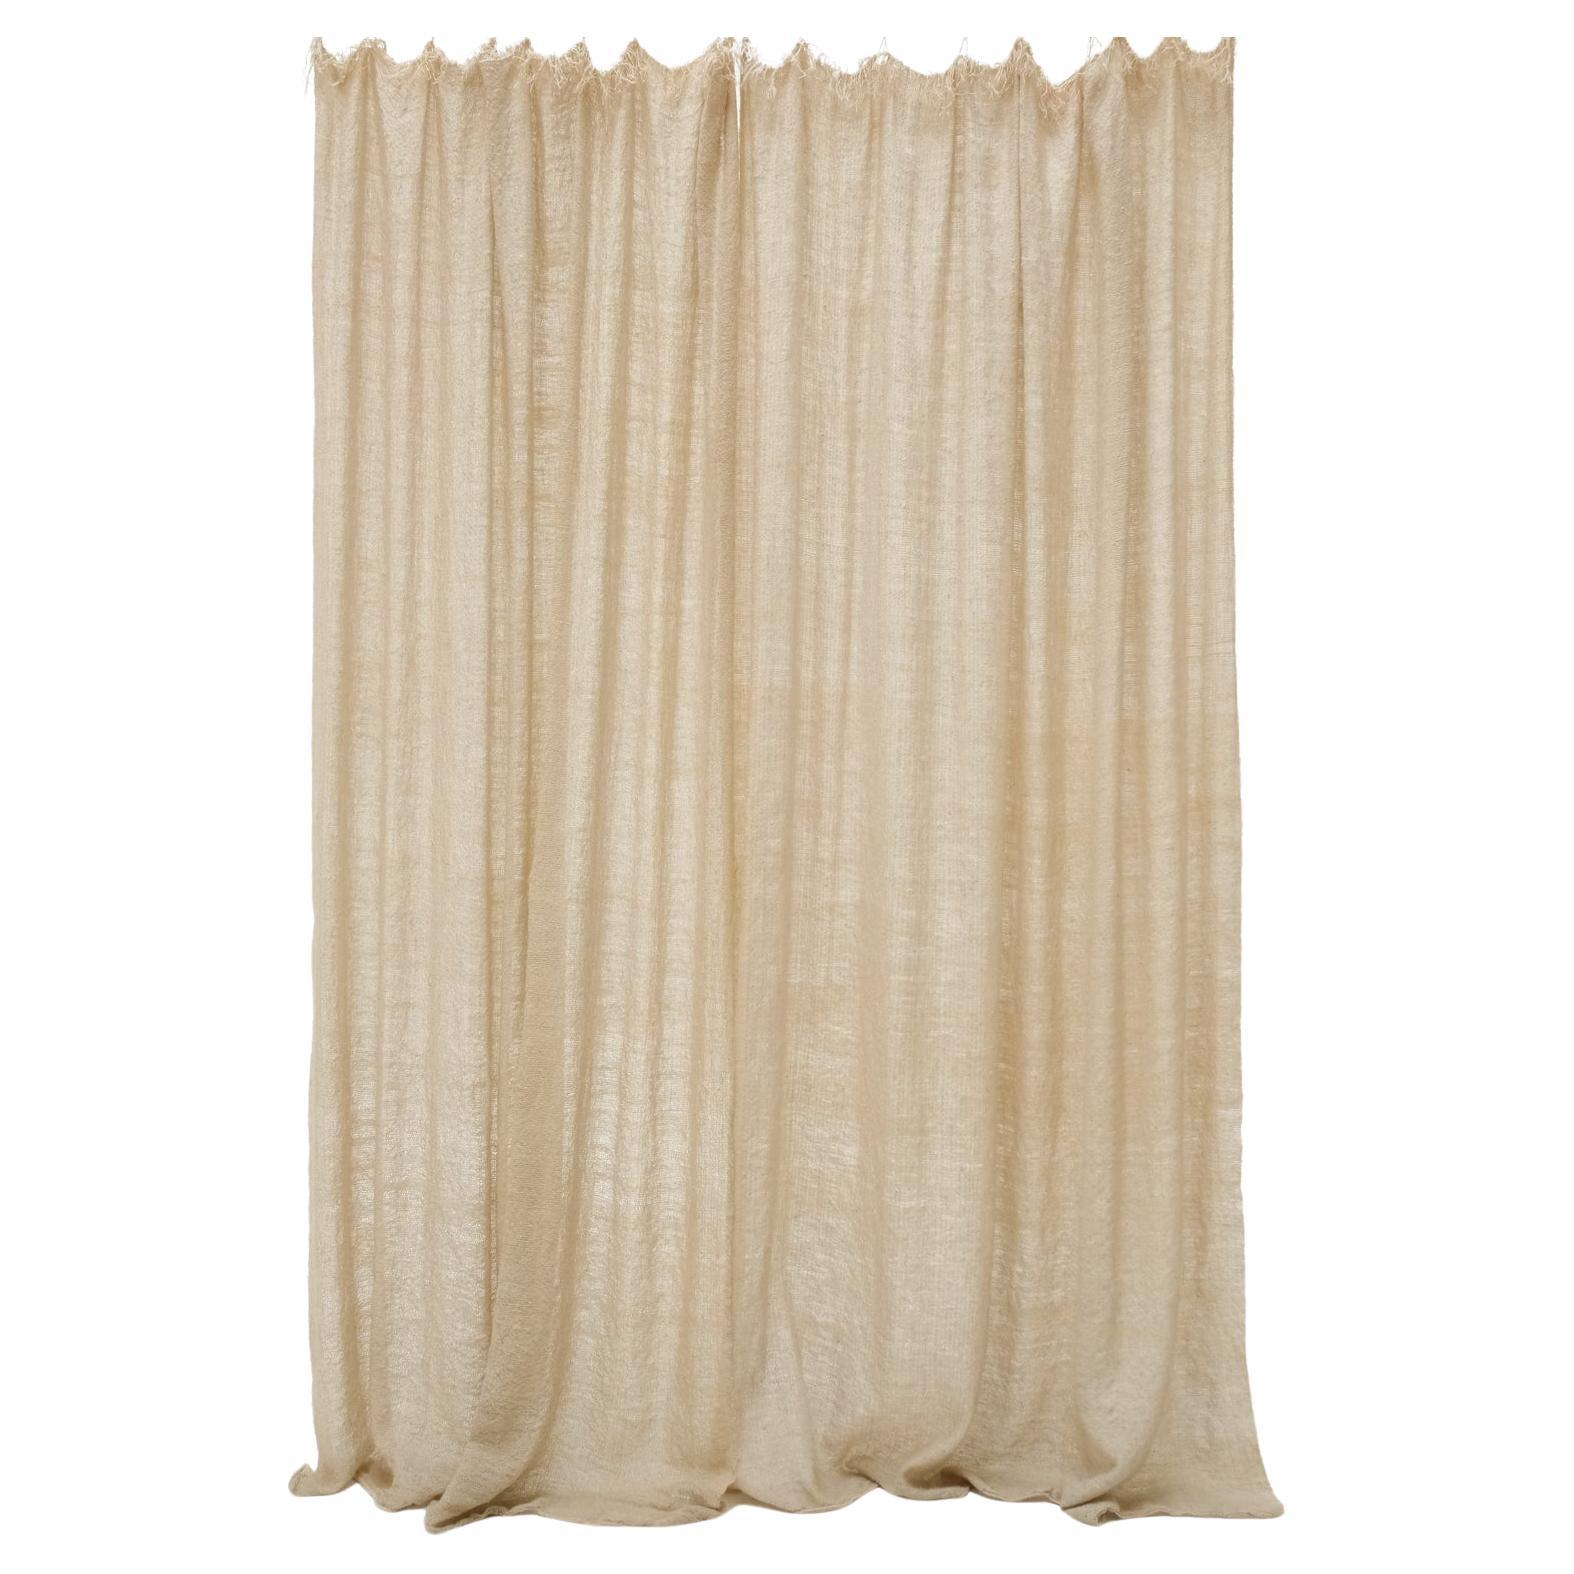 Curtains Made of handspun and handwoven local Wool For Sale